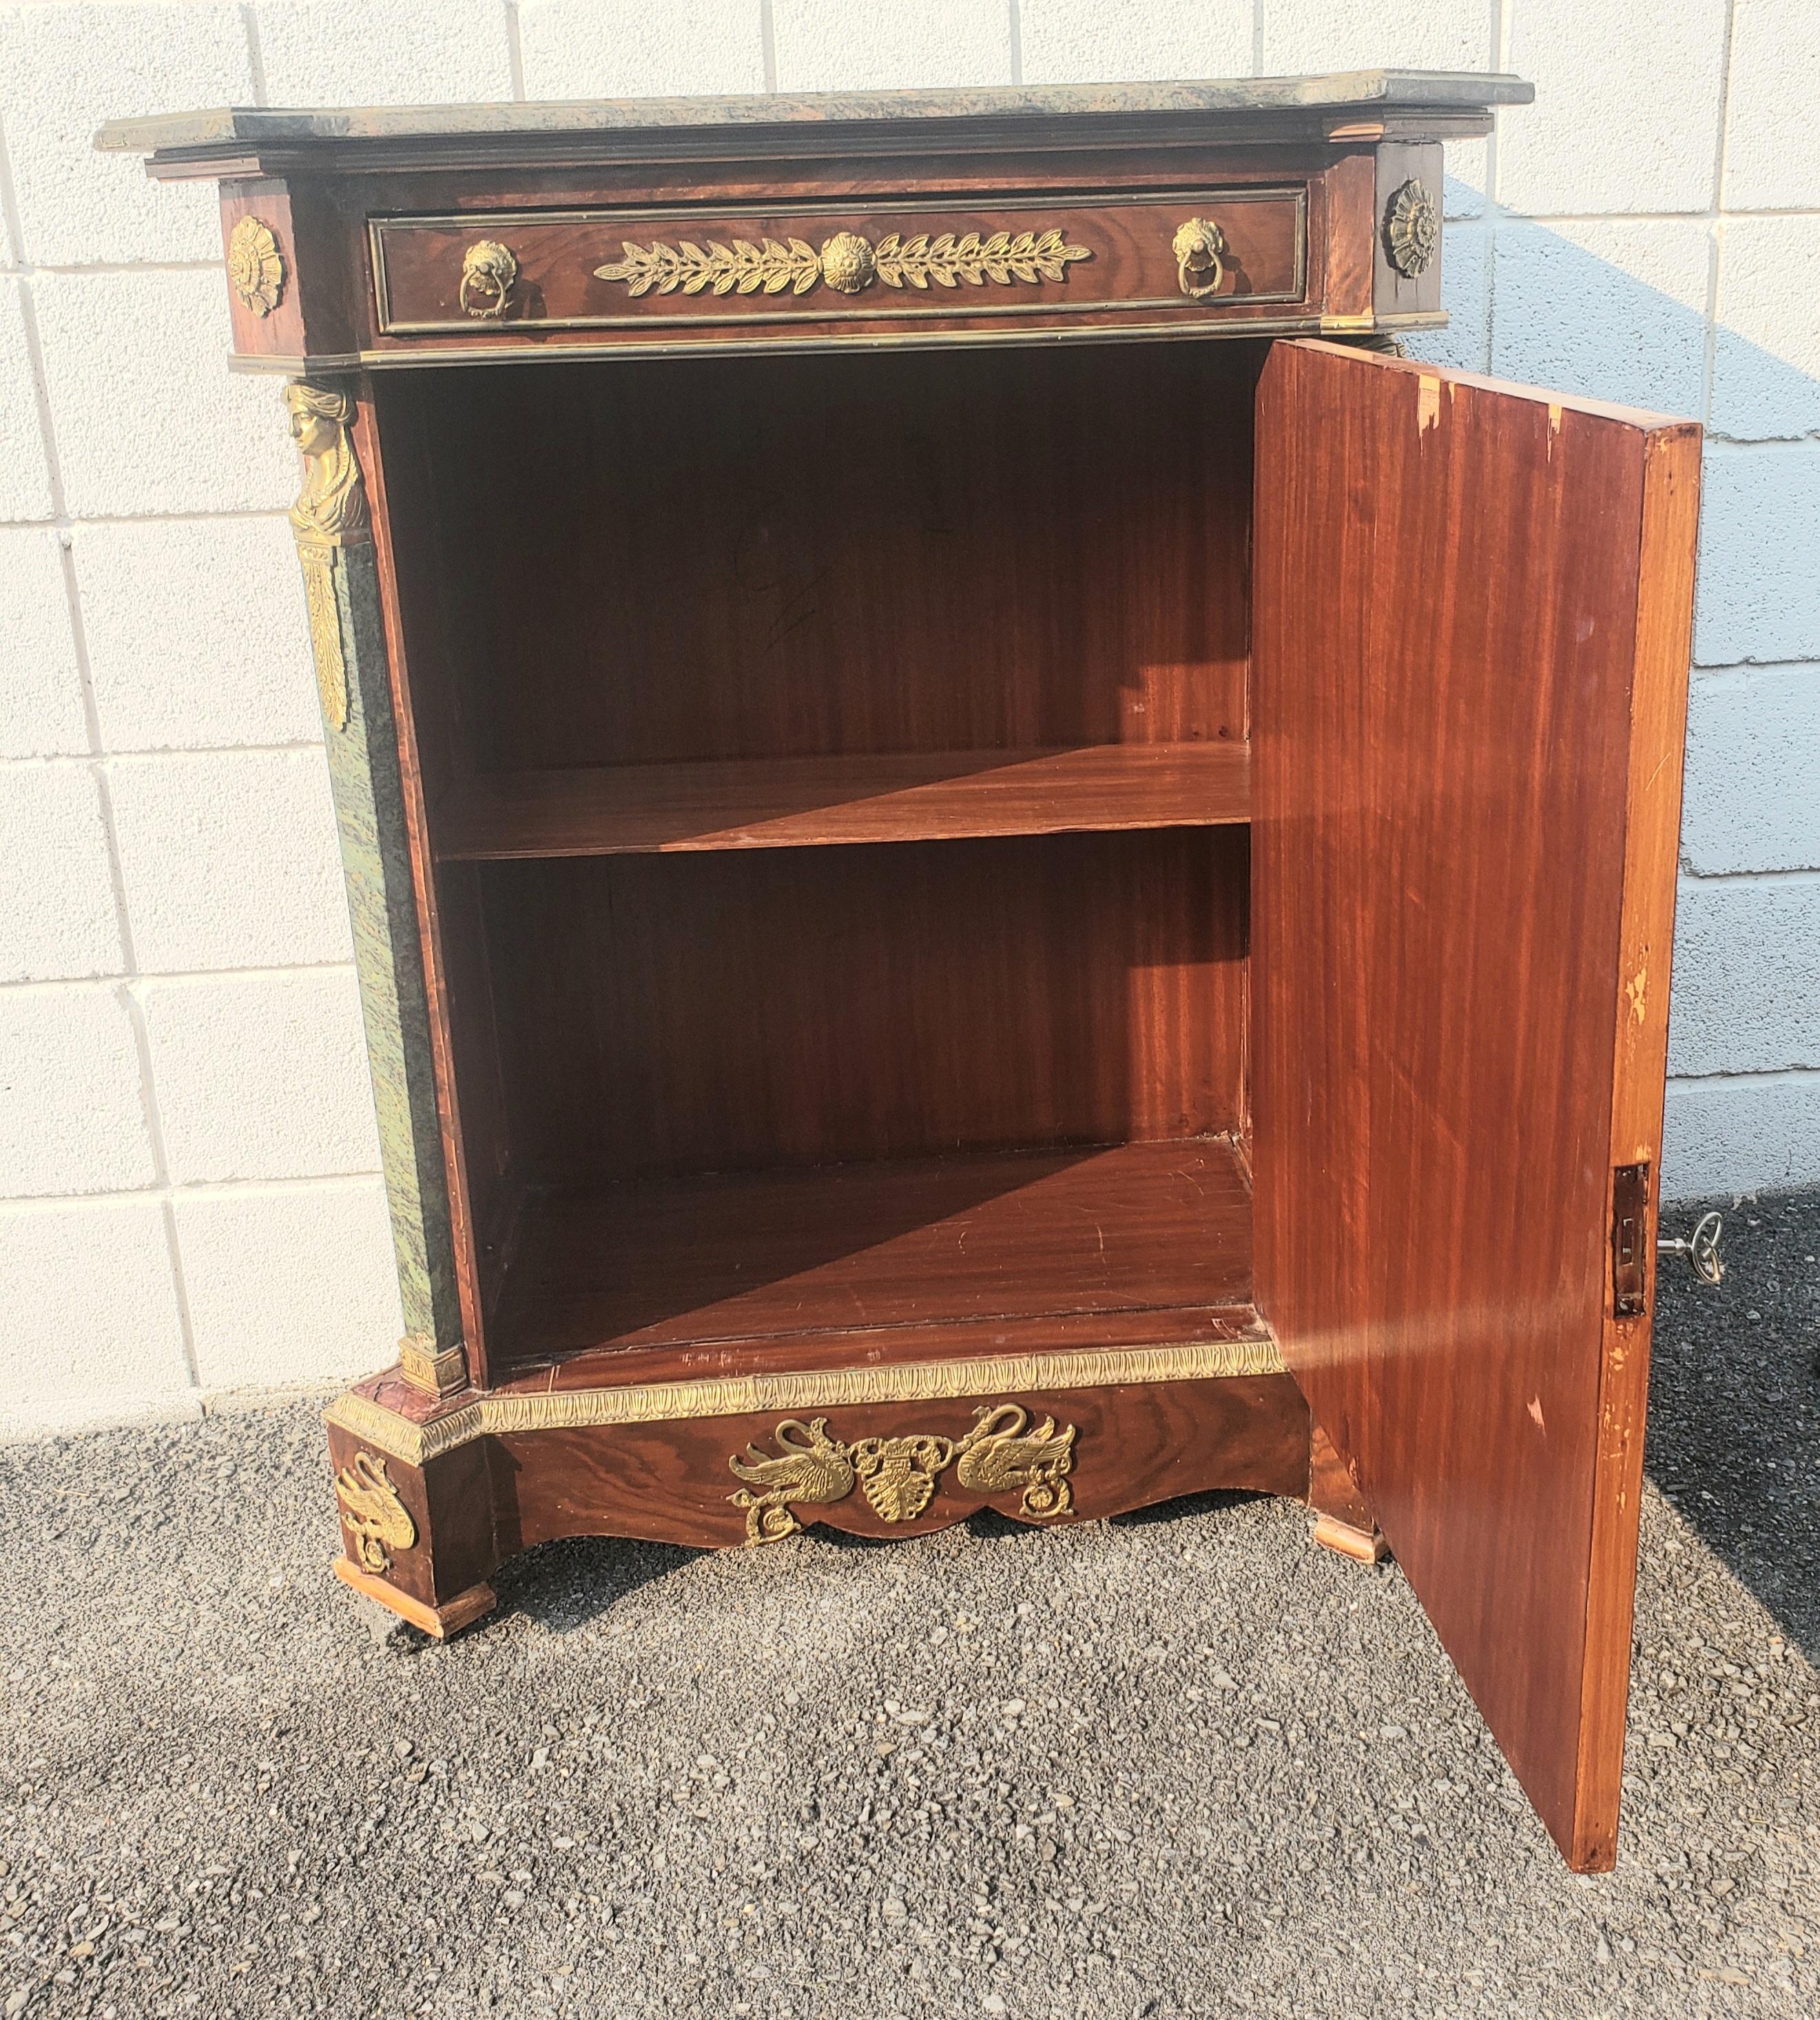 A fine 19th Century Louis XV Style Ormolu Mounted on Burl Kingwood with Marble mounts and Top Cabinet. Great as a bar cabinet. Comes with a functional key. Meaures 37